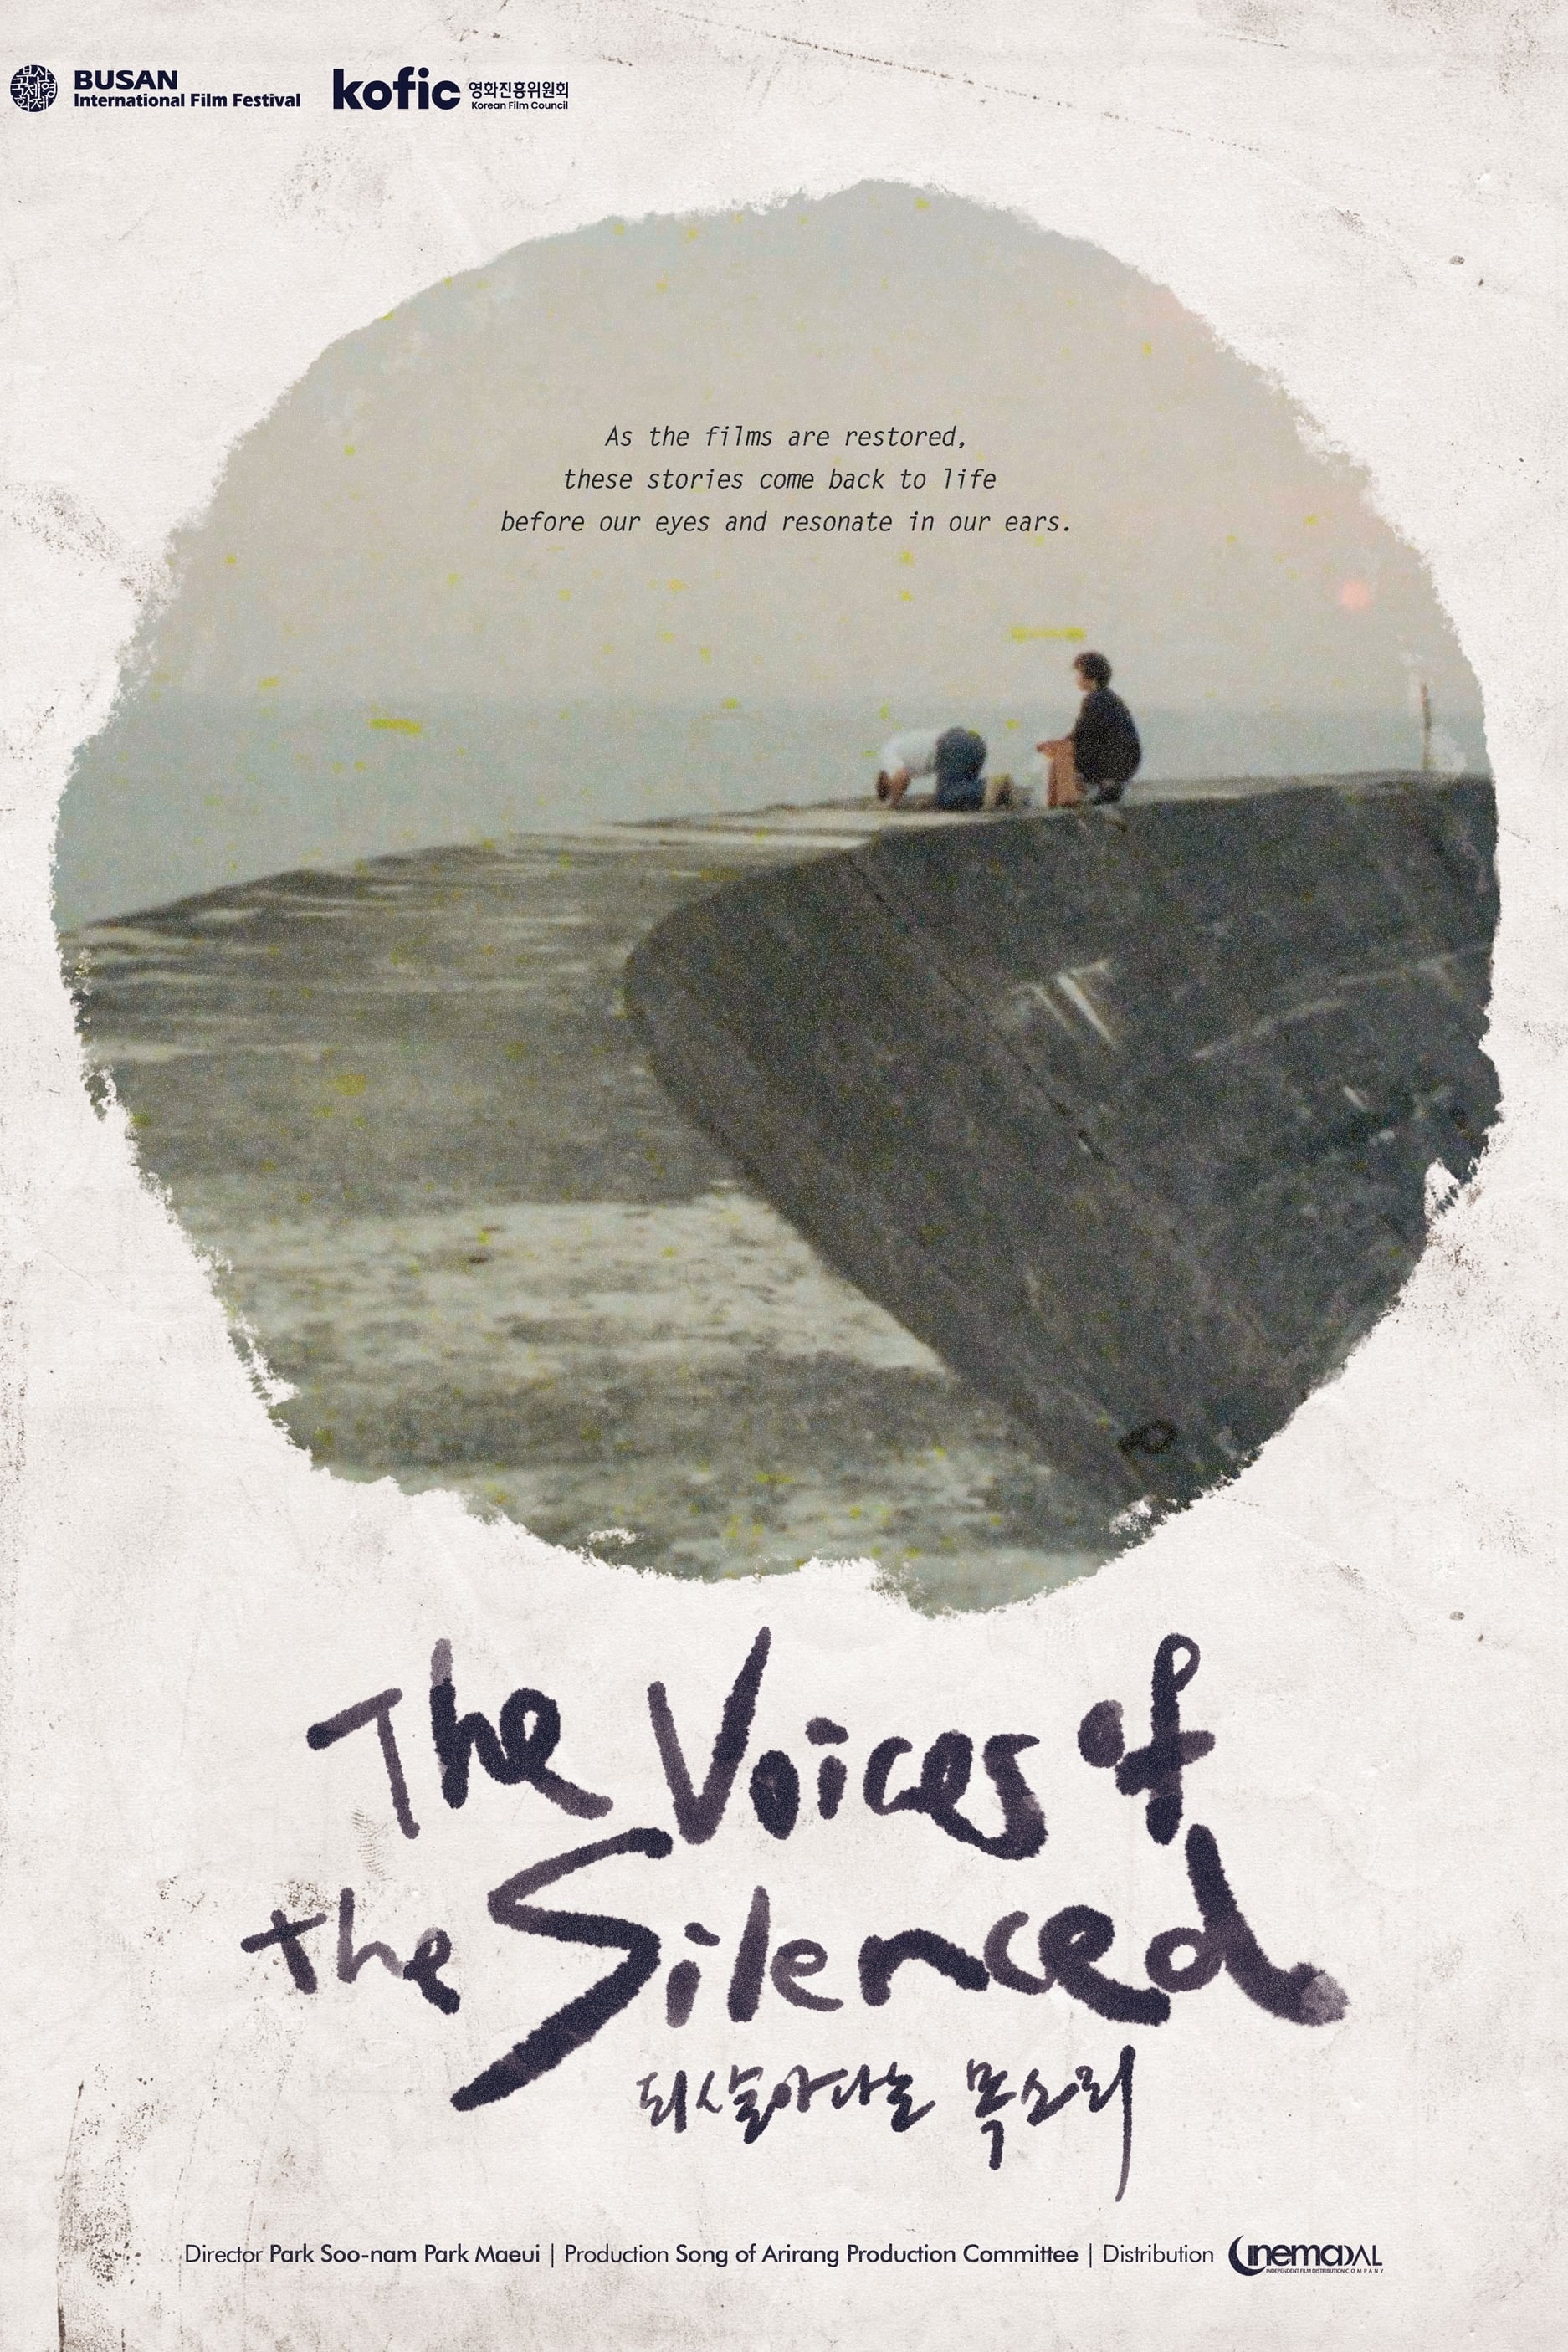 The Voices of the Silenced